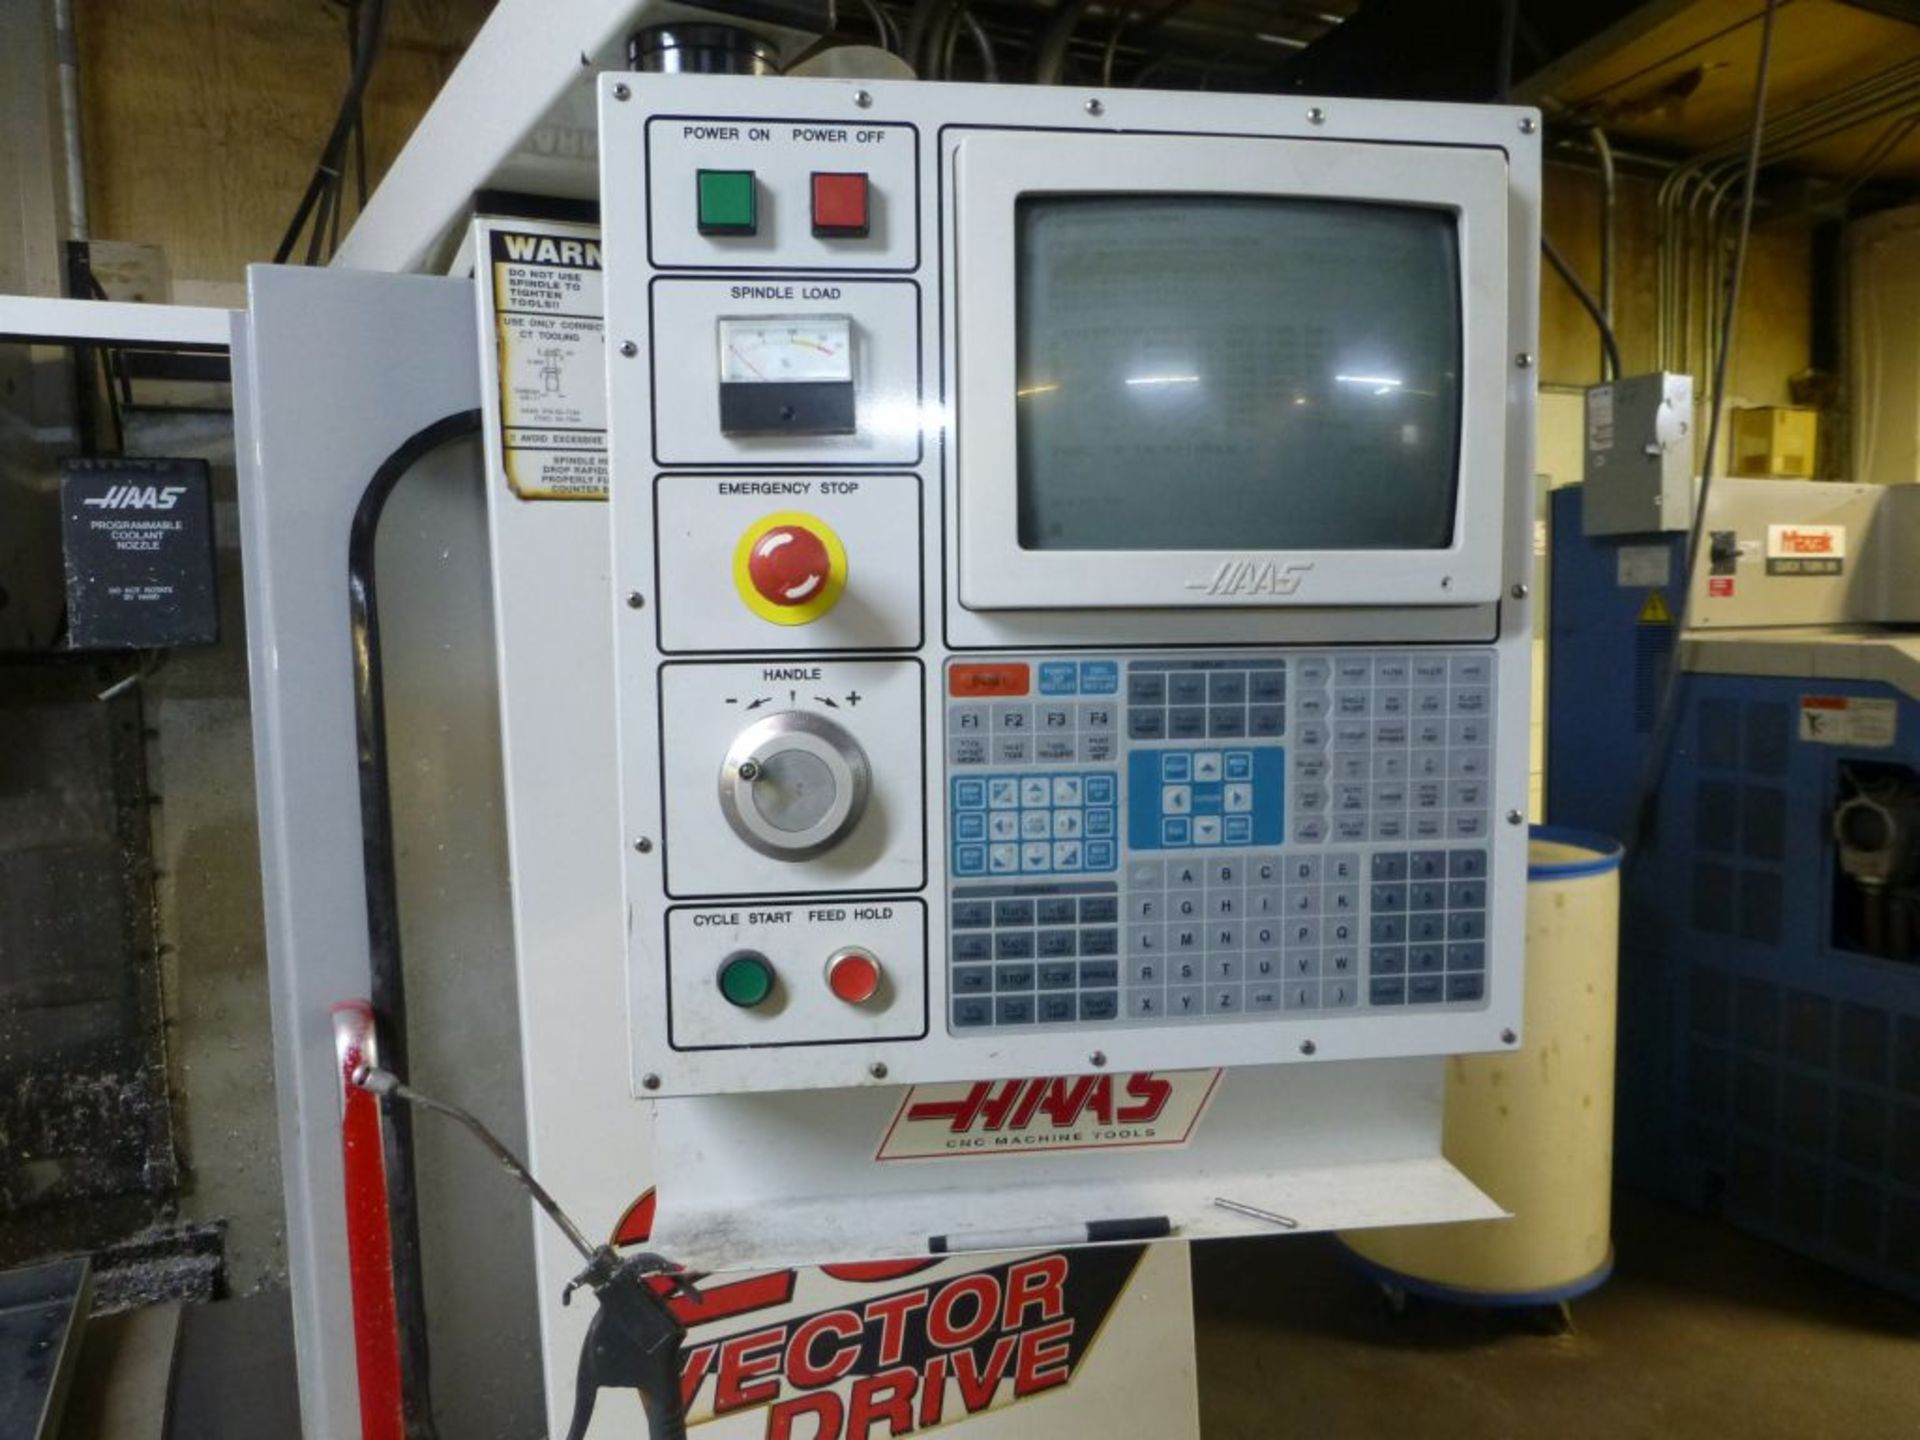 Haas VF-0 CNC Vertical Machining Center; 20 HP High Torque Spindle; Model No. 3; Mfg: 7/96; 208/ - Image 2 of 18